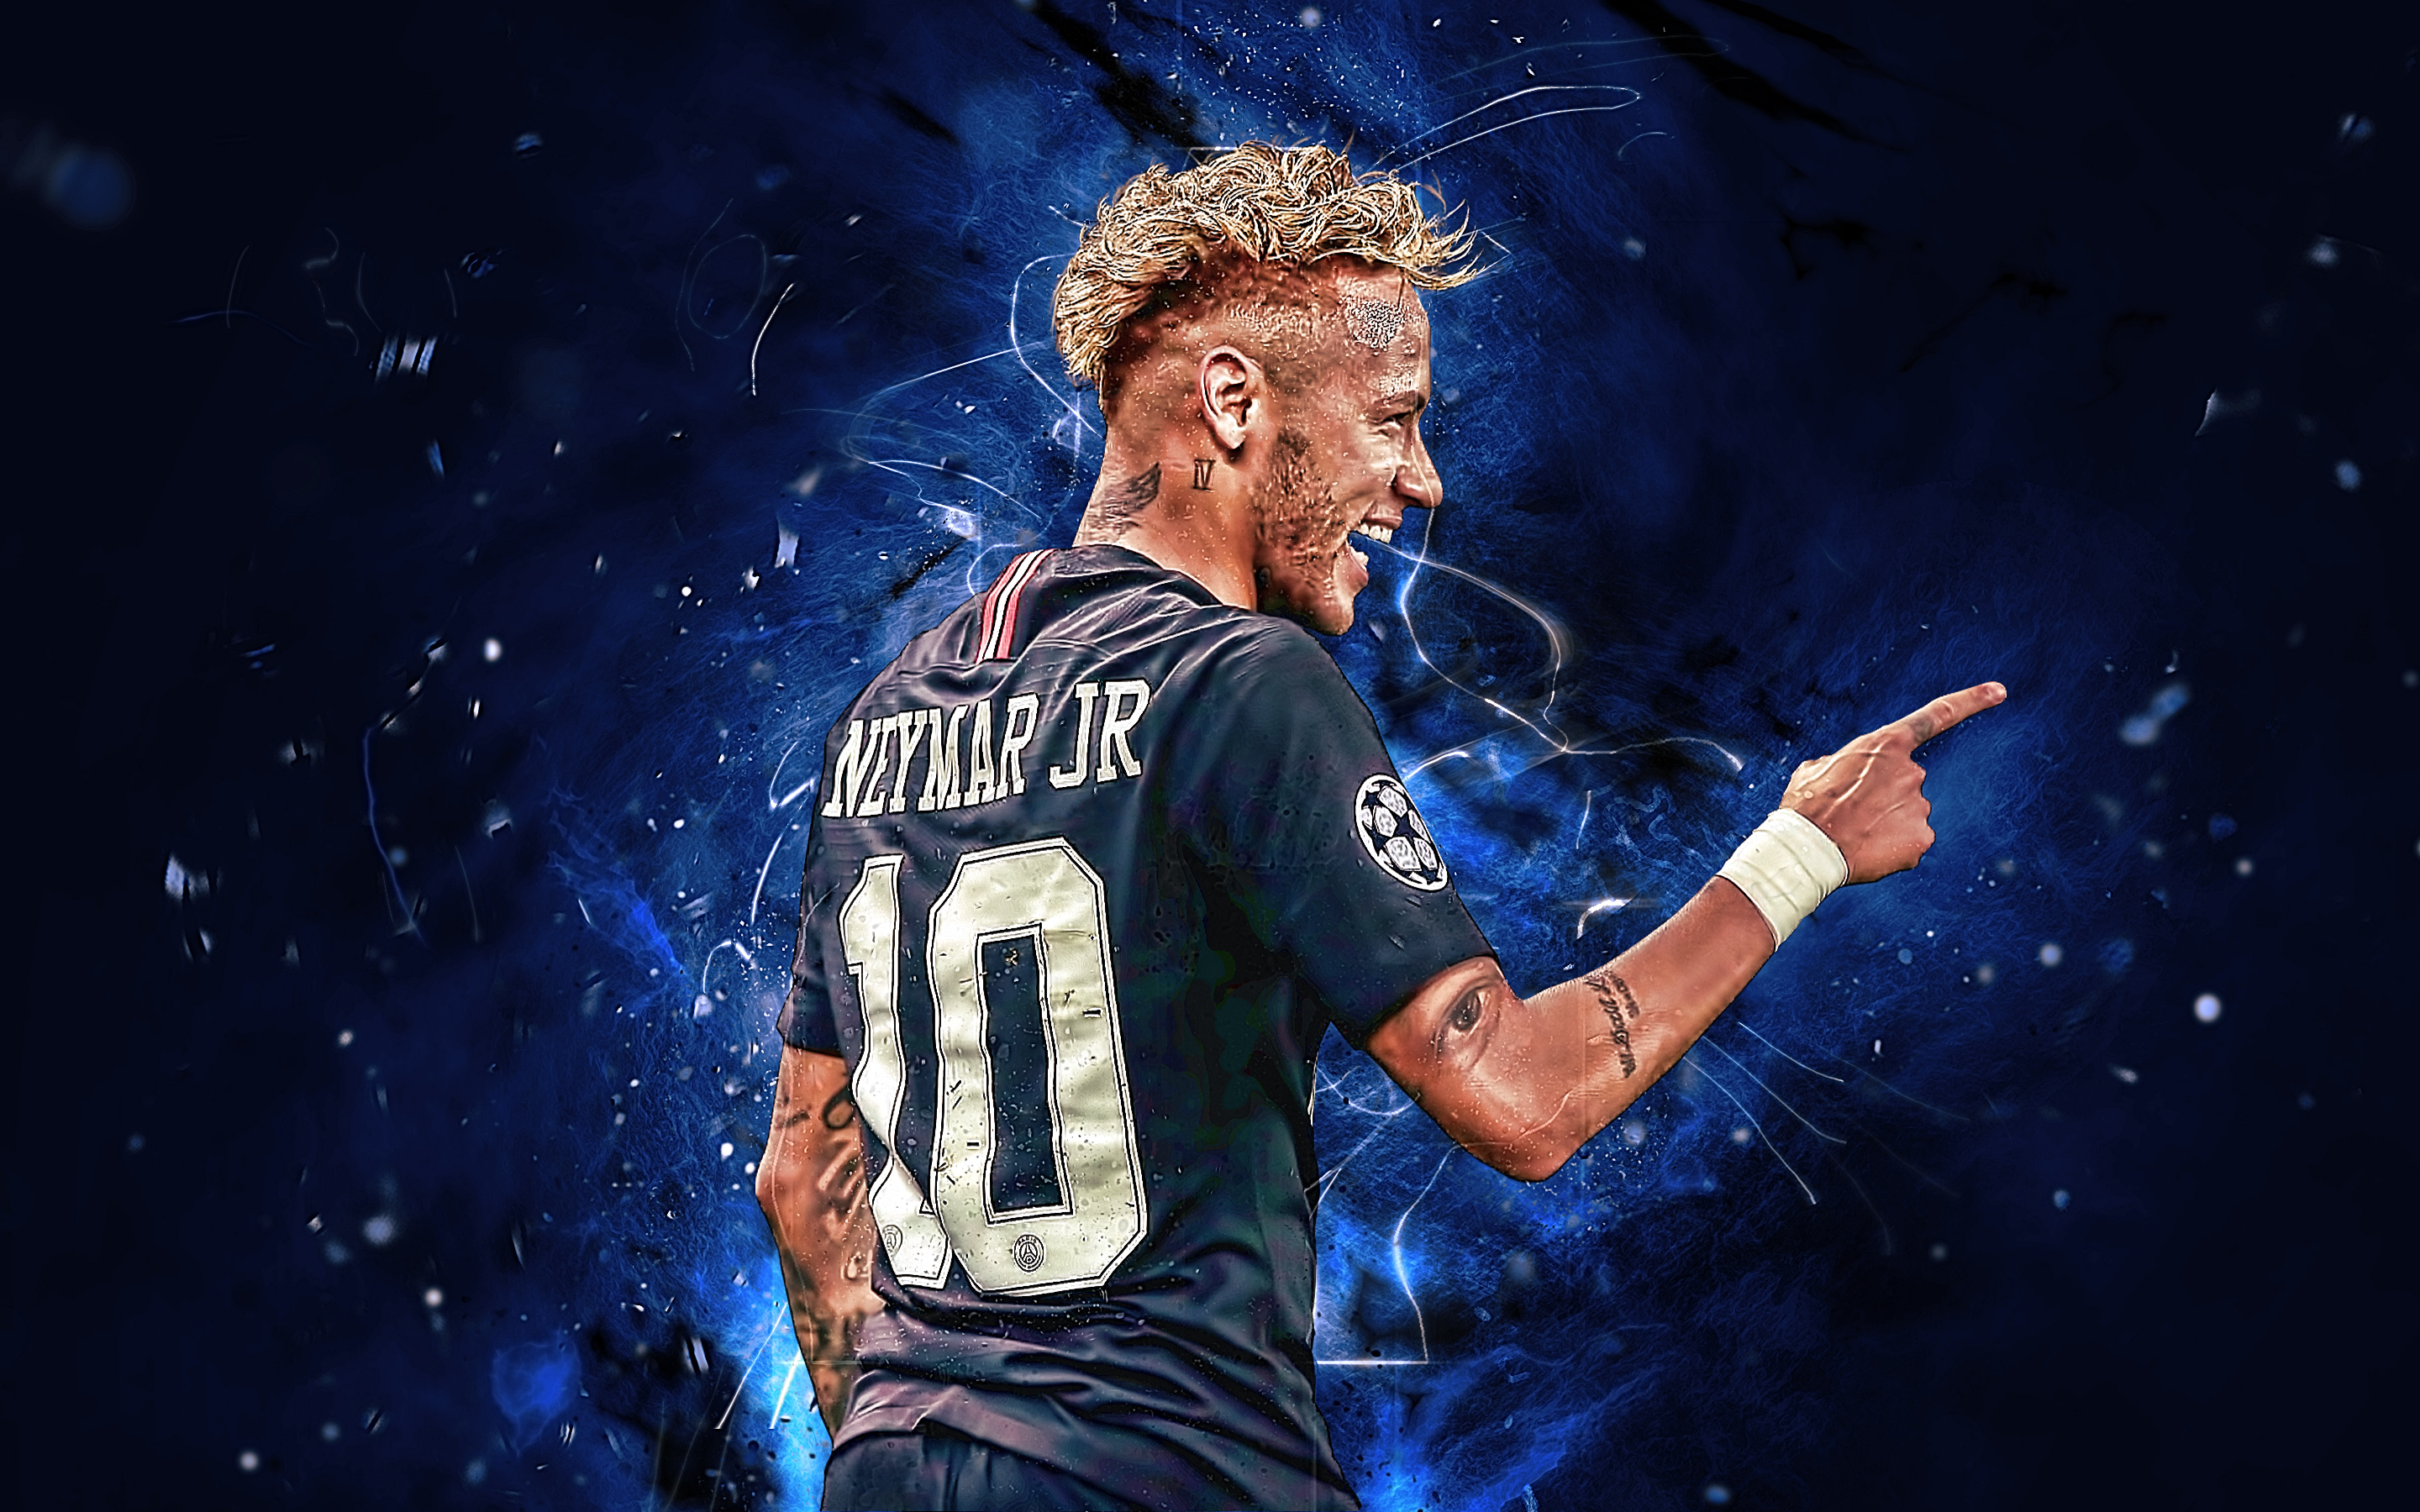 Free Download Neymar Jr Psg Hd Wallpaper Background Image 2880x1800 Id 2880x1800 For Your Desktop Mobile Tablet Explore 35 Psg Background Psg Wallpapers Psg Wallpaper Psg 2019 Wallpapers